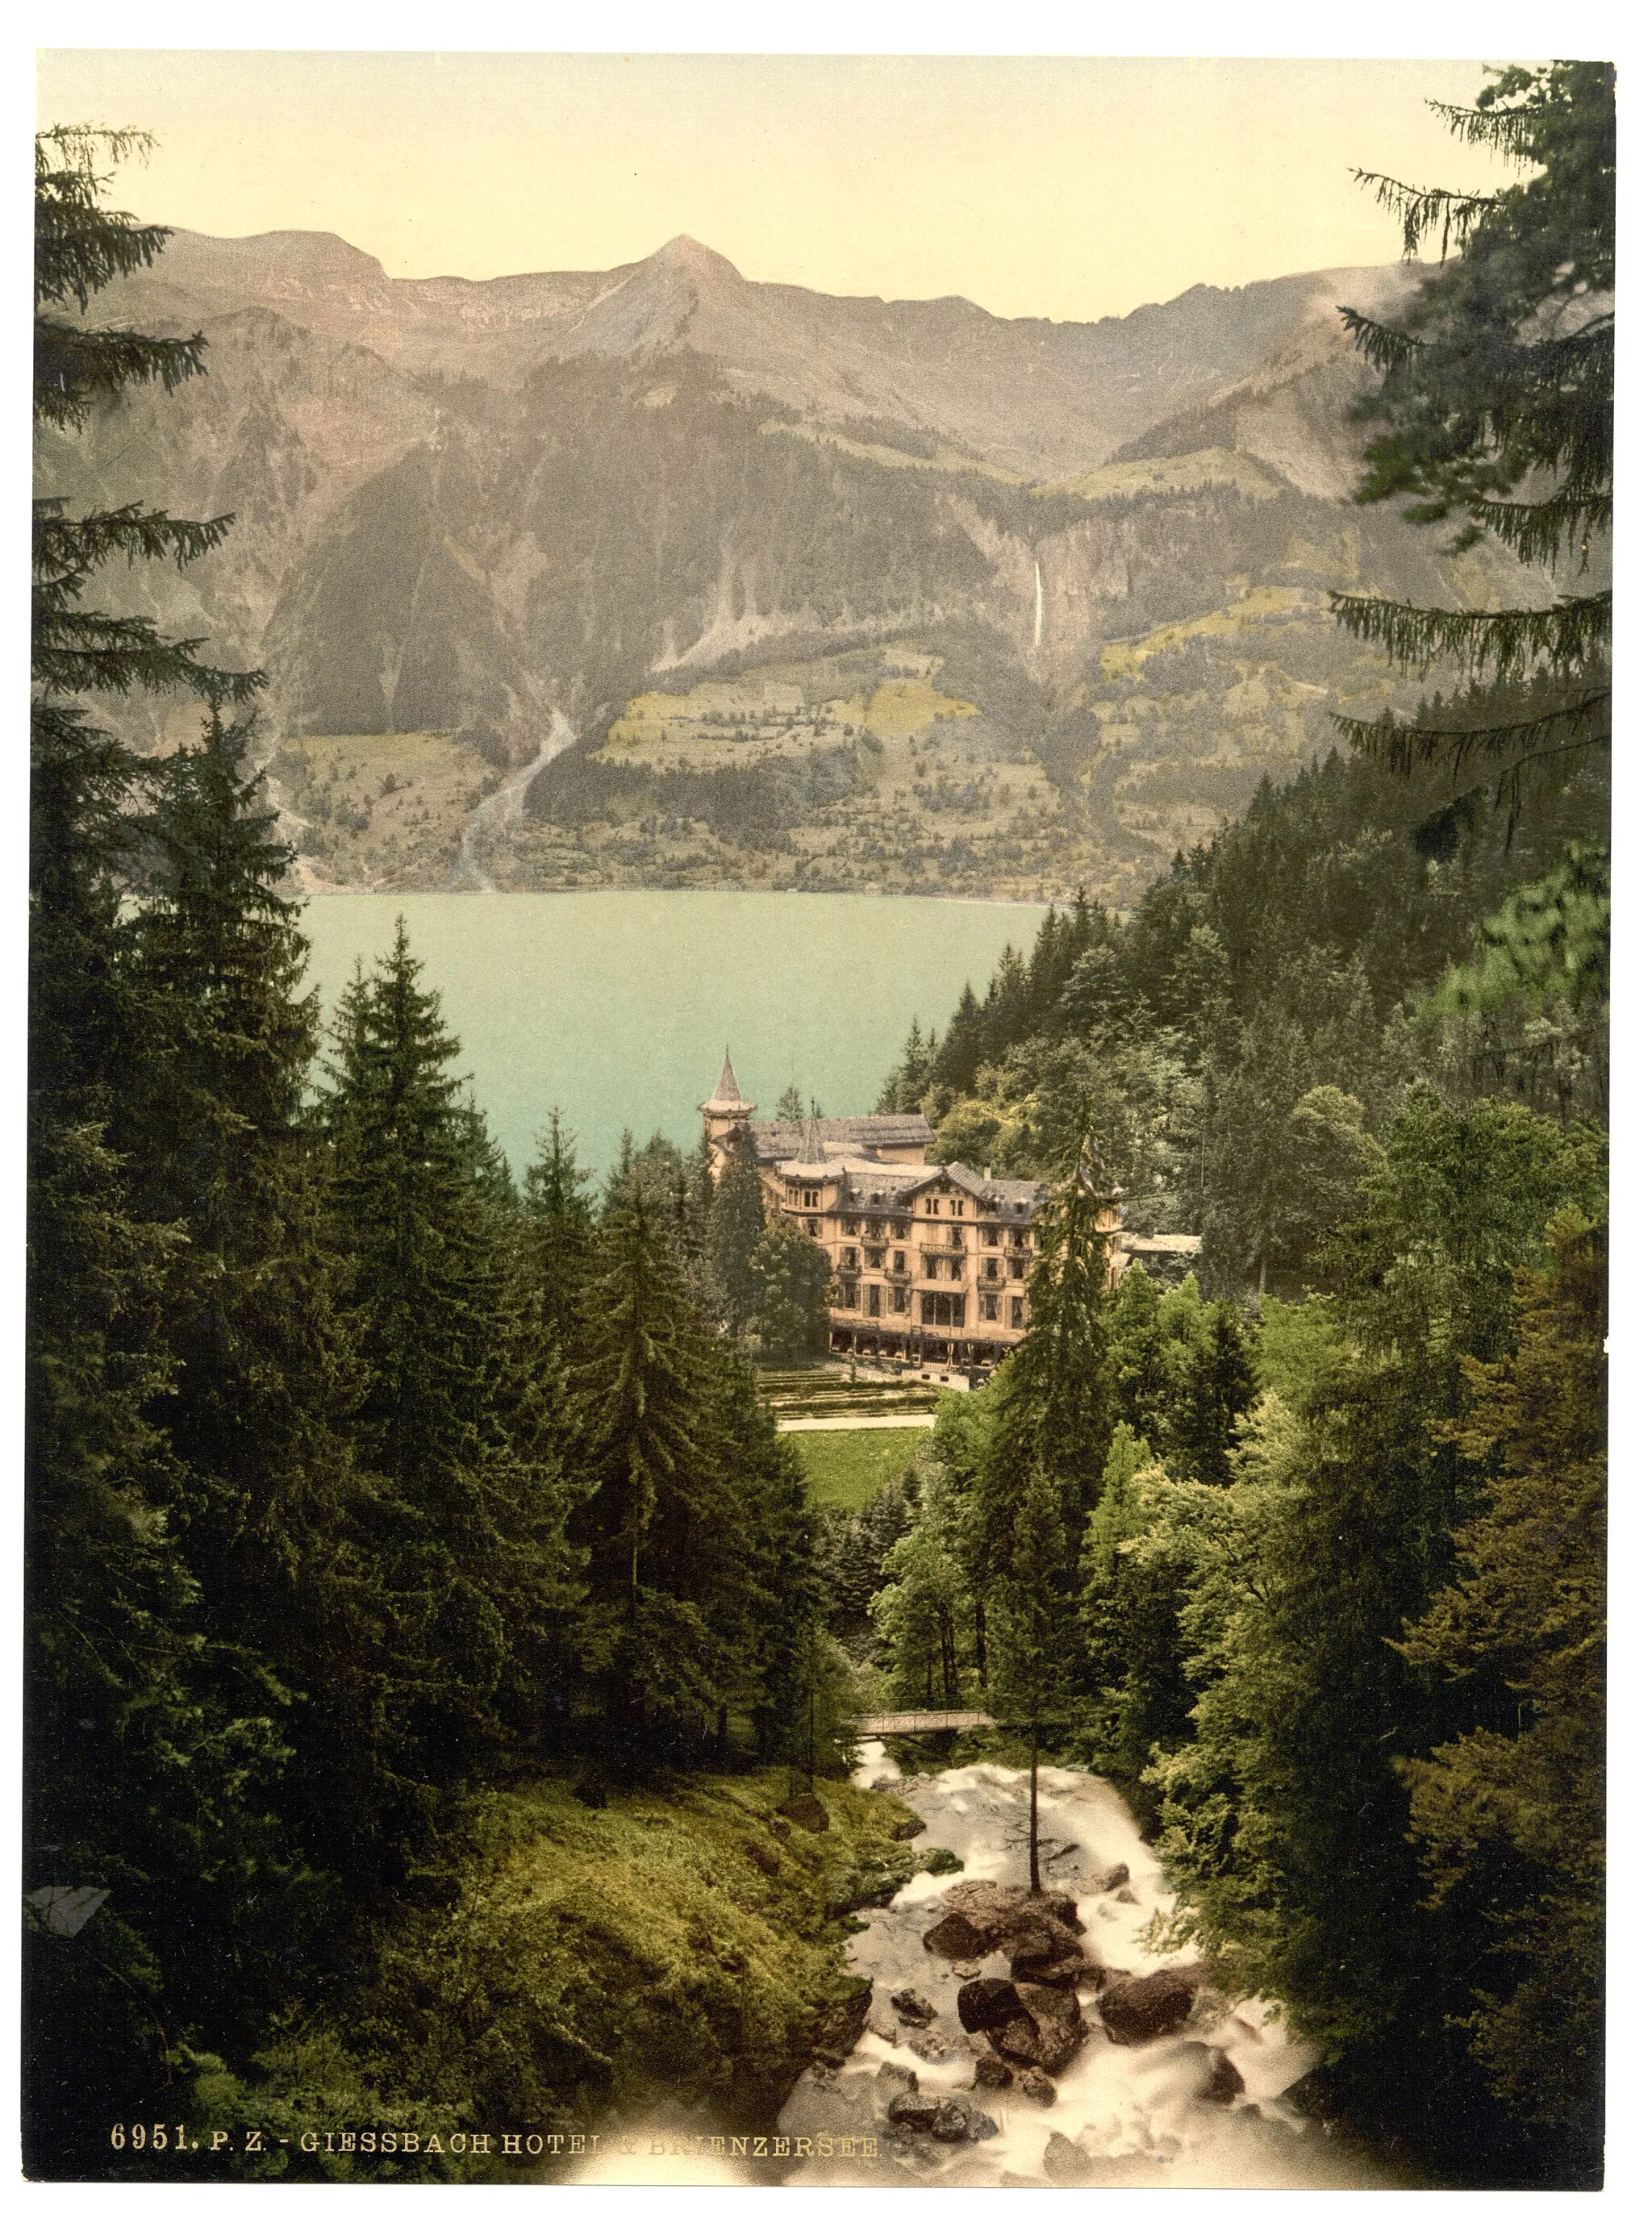 Photo showing: Print no. "6951".; Title from the Detroit Publishing Co., Catalogue J-foreign section, Detroit, Mich. : Detroit Publishing Company, 1905.; Forms part of: Views of Switzerland in the Photochrom print collection.